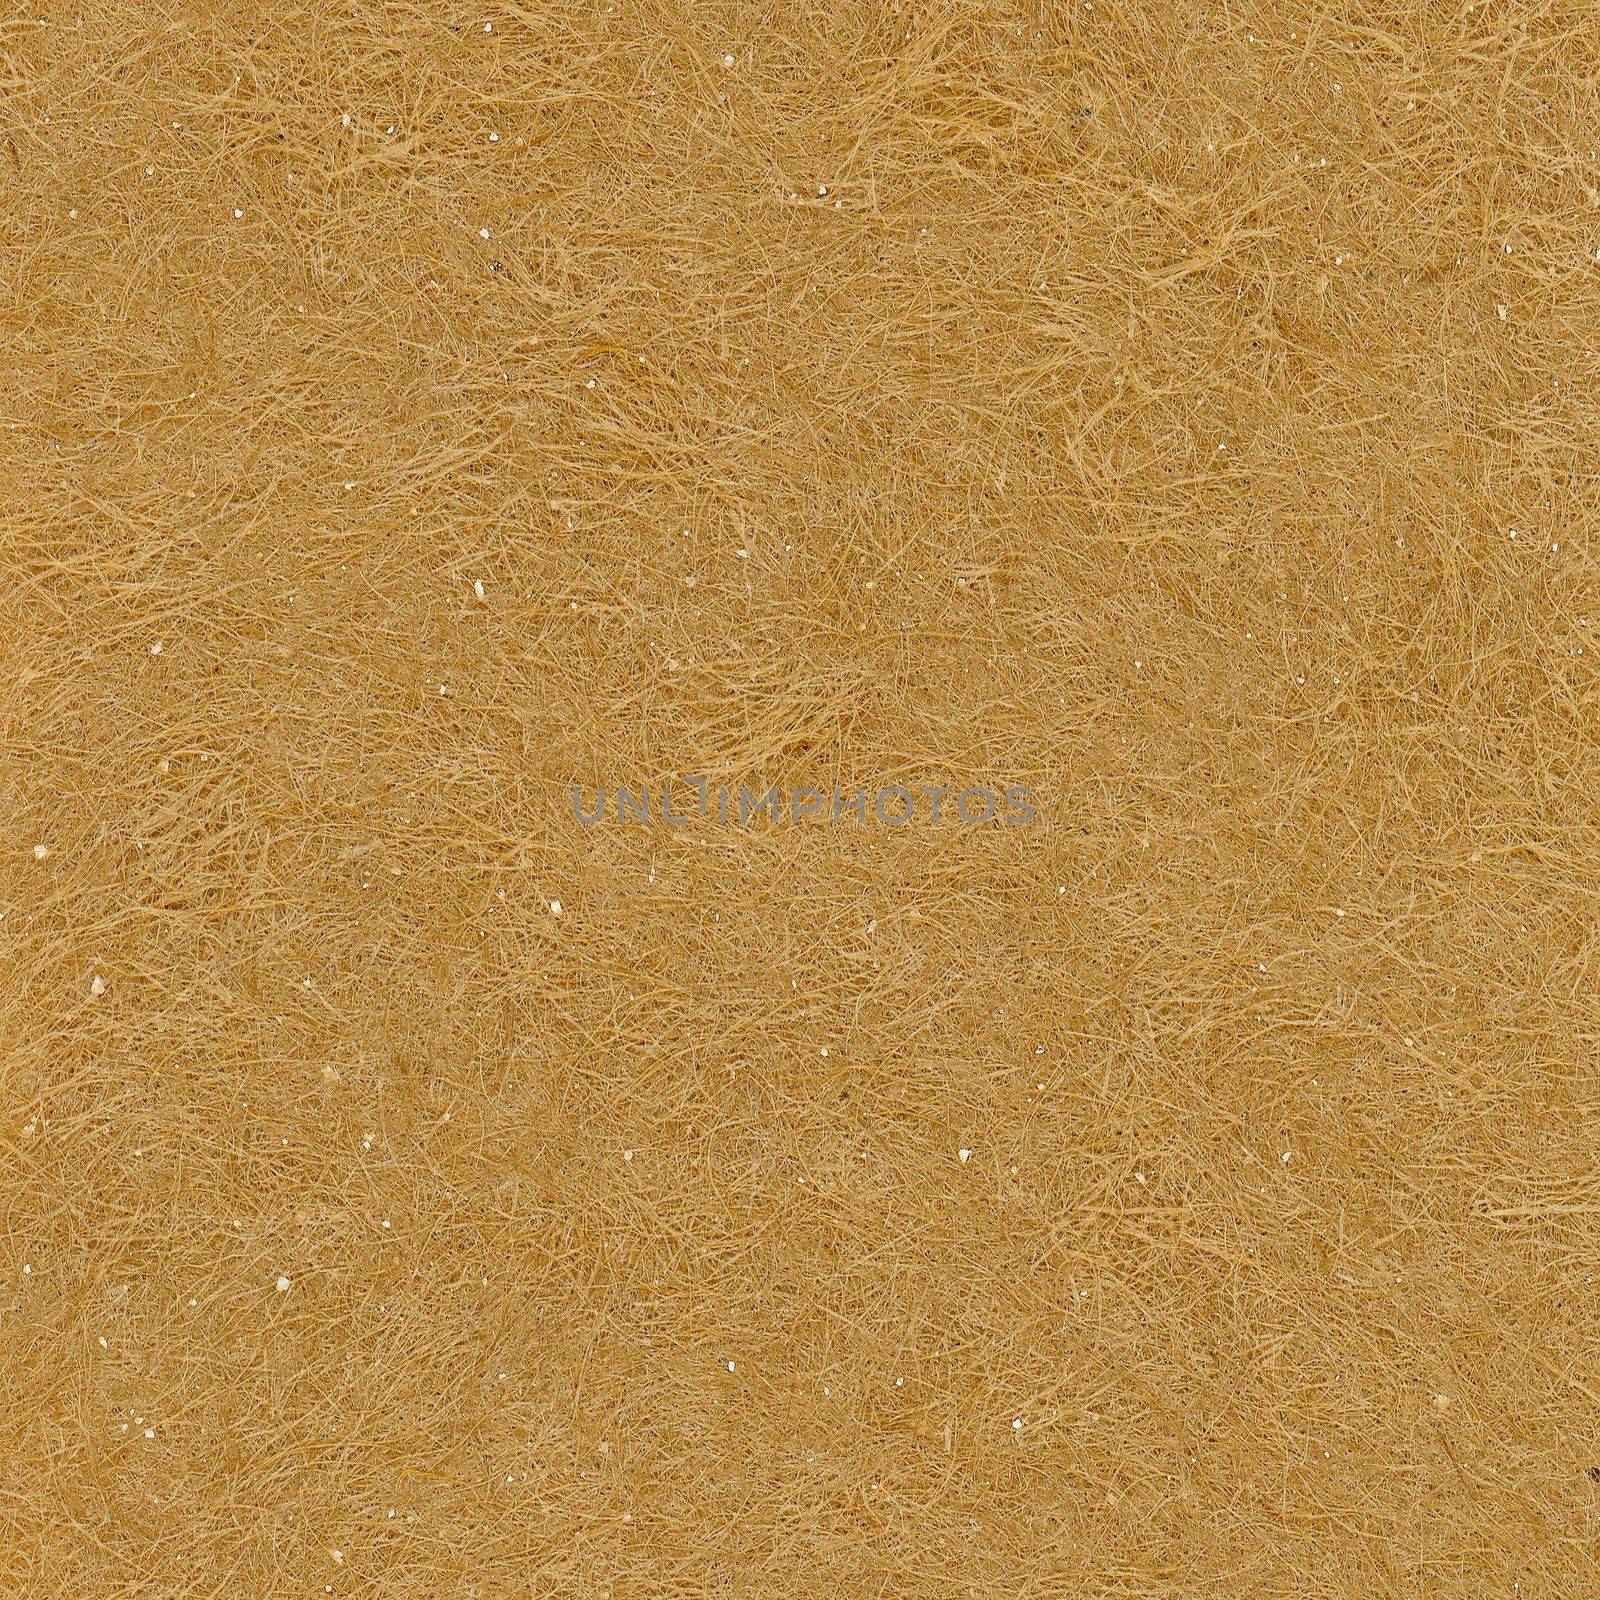 micrograph view of brown cardboard by claudiodivizia